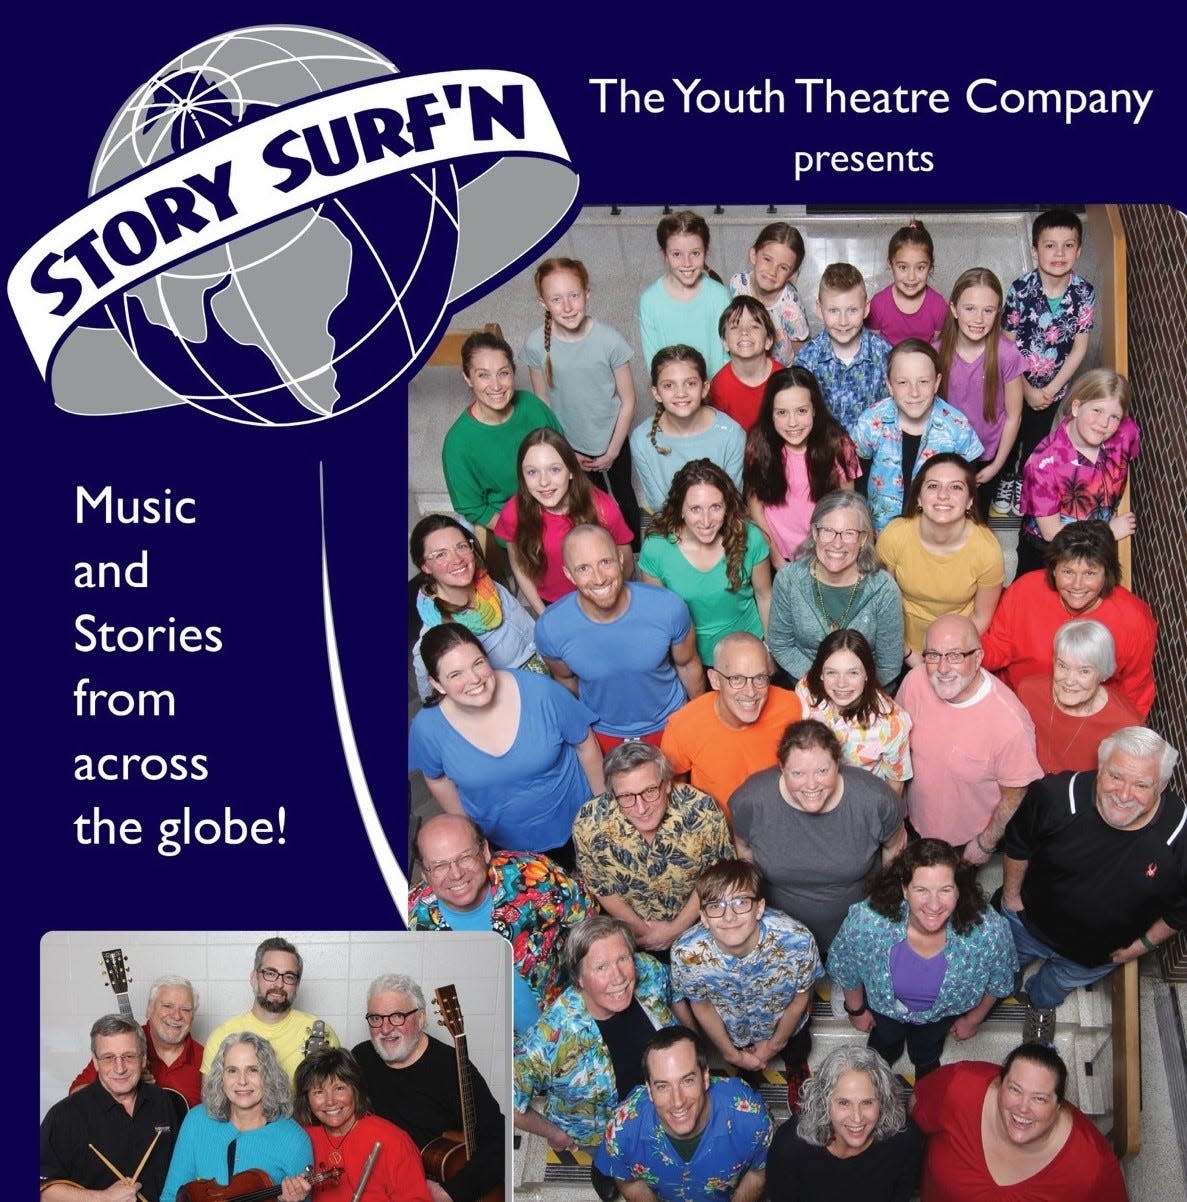 Clip of a Youth Theatre Company poster promoting its show 'Story Surf'n!'